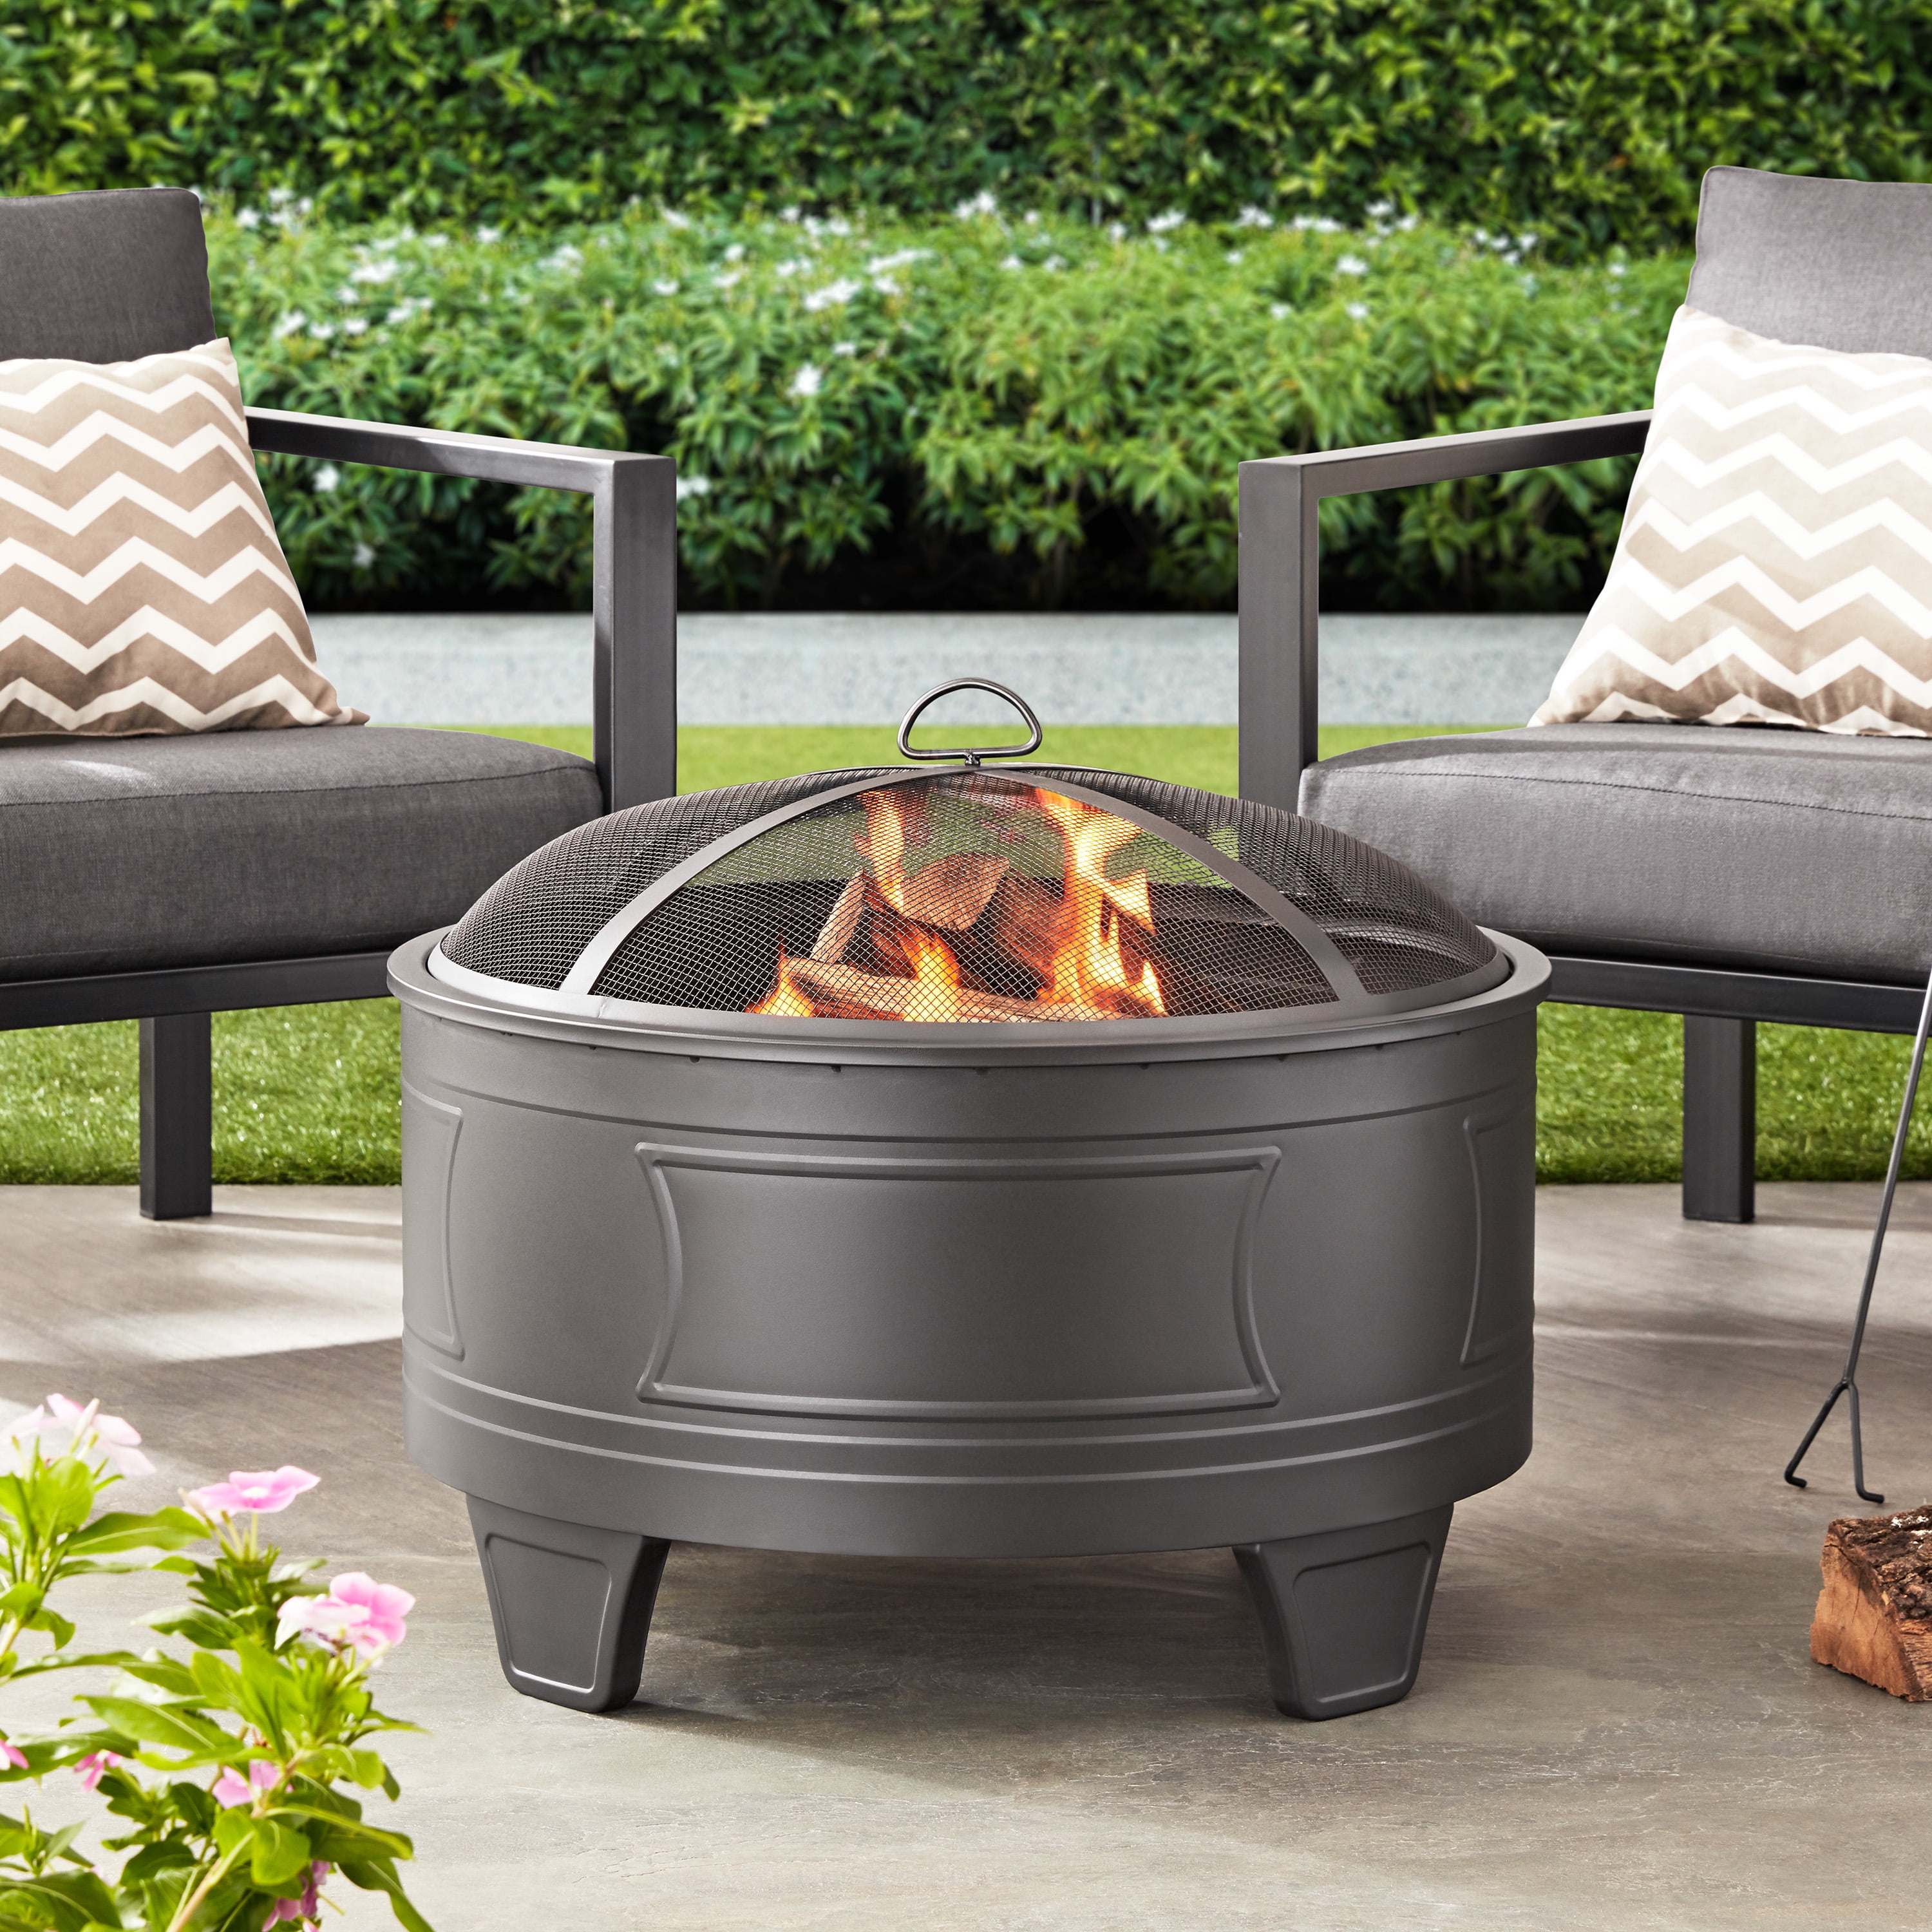 Better Homes and Gardens 26" Damon Deep Bowl Wood Burning Fire Pit